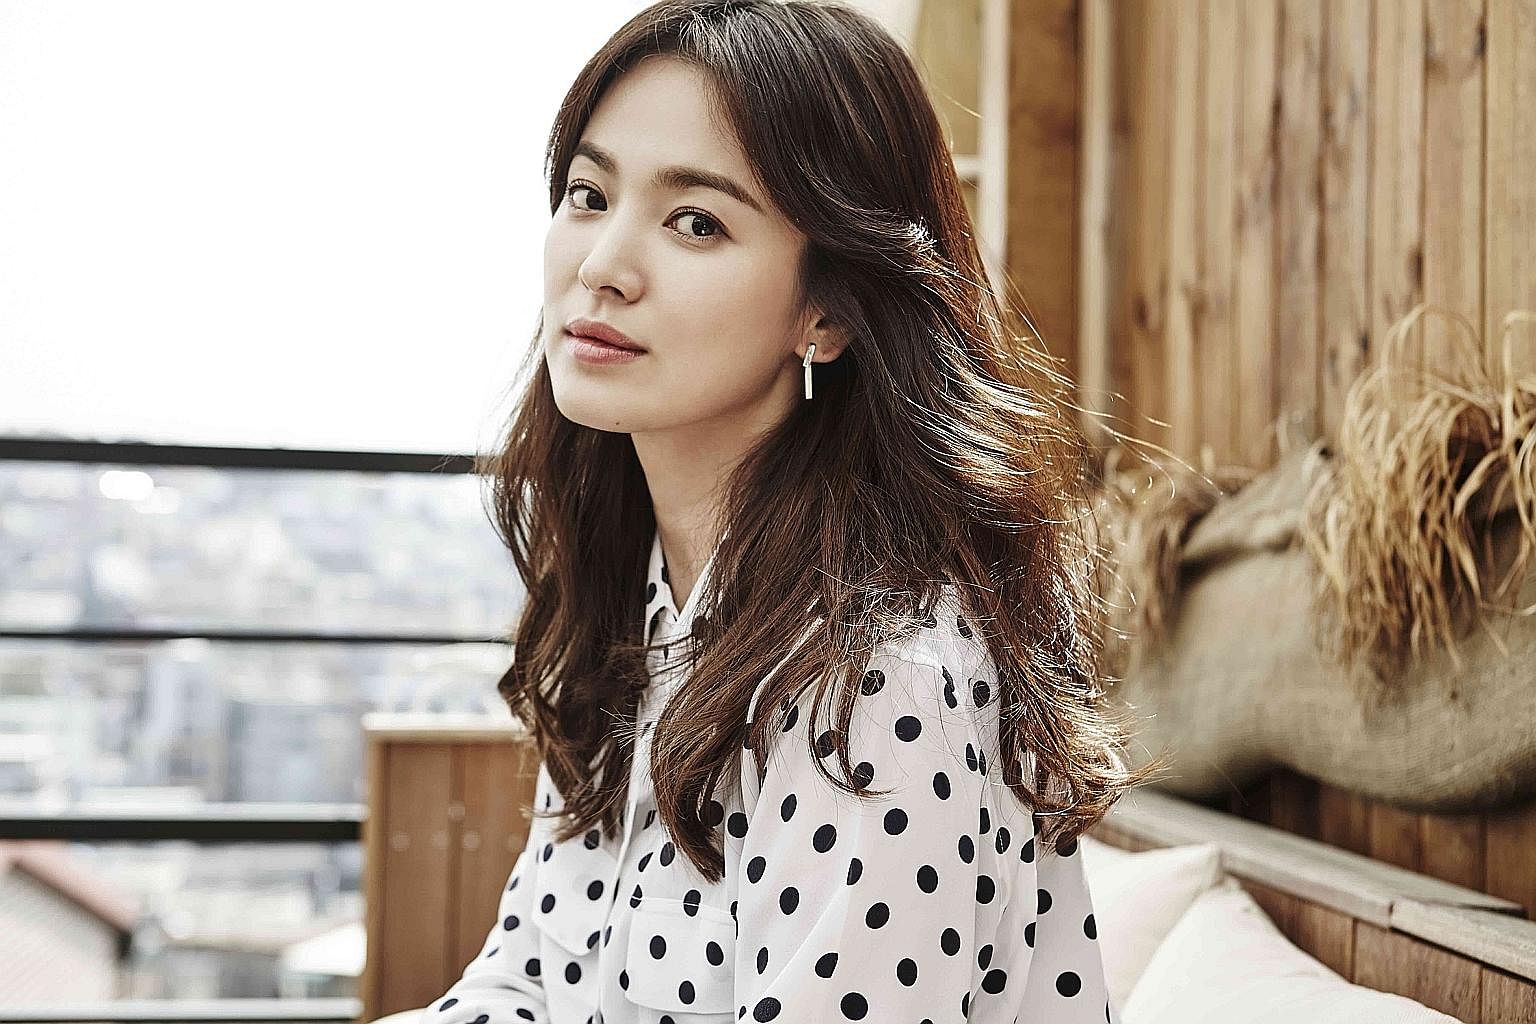 Glowing like K-drama stars such as Song Hye Kyo (above) is a gold standard for many.